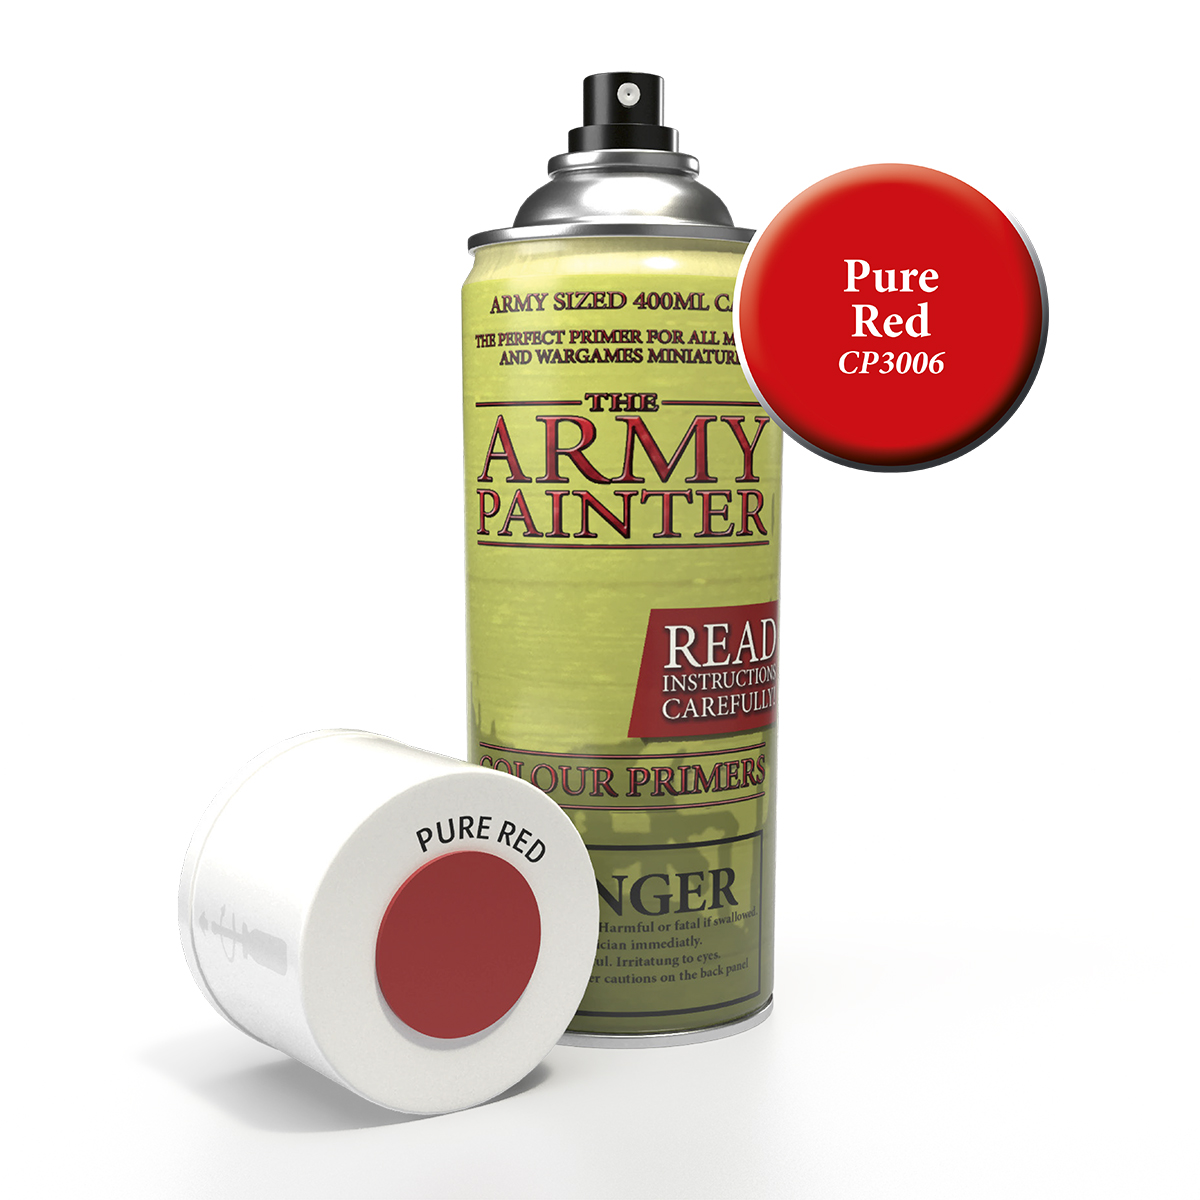 ArmyPainter Colorspray Pure Red